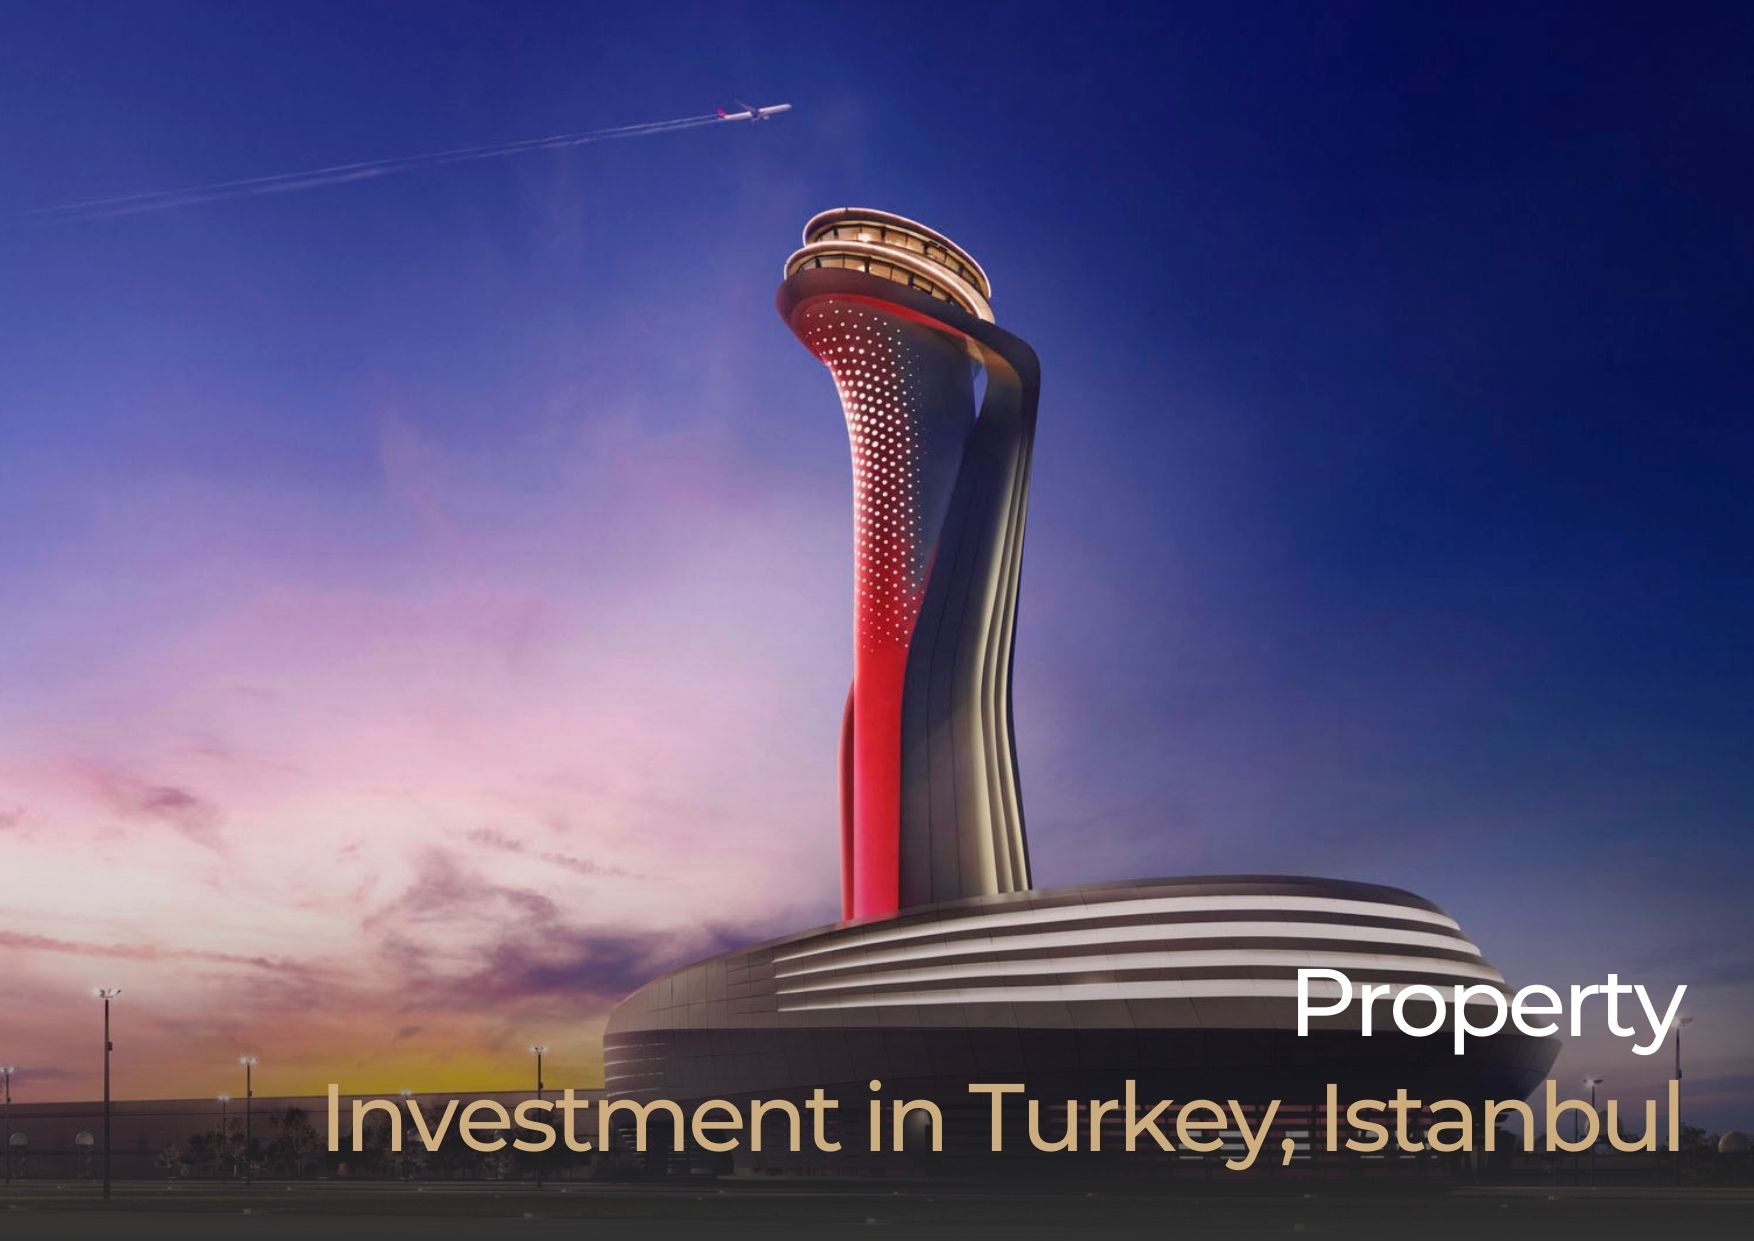 /wp-content/uploads/2023/05/property-investment-in-turkey-istanbul.jpg